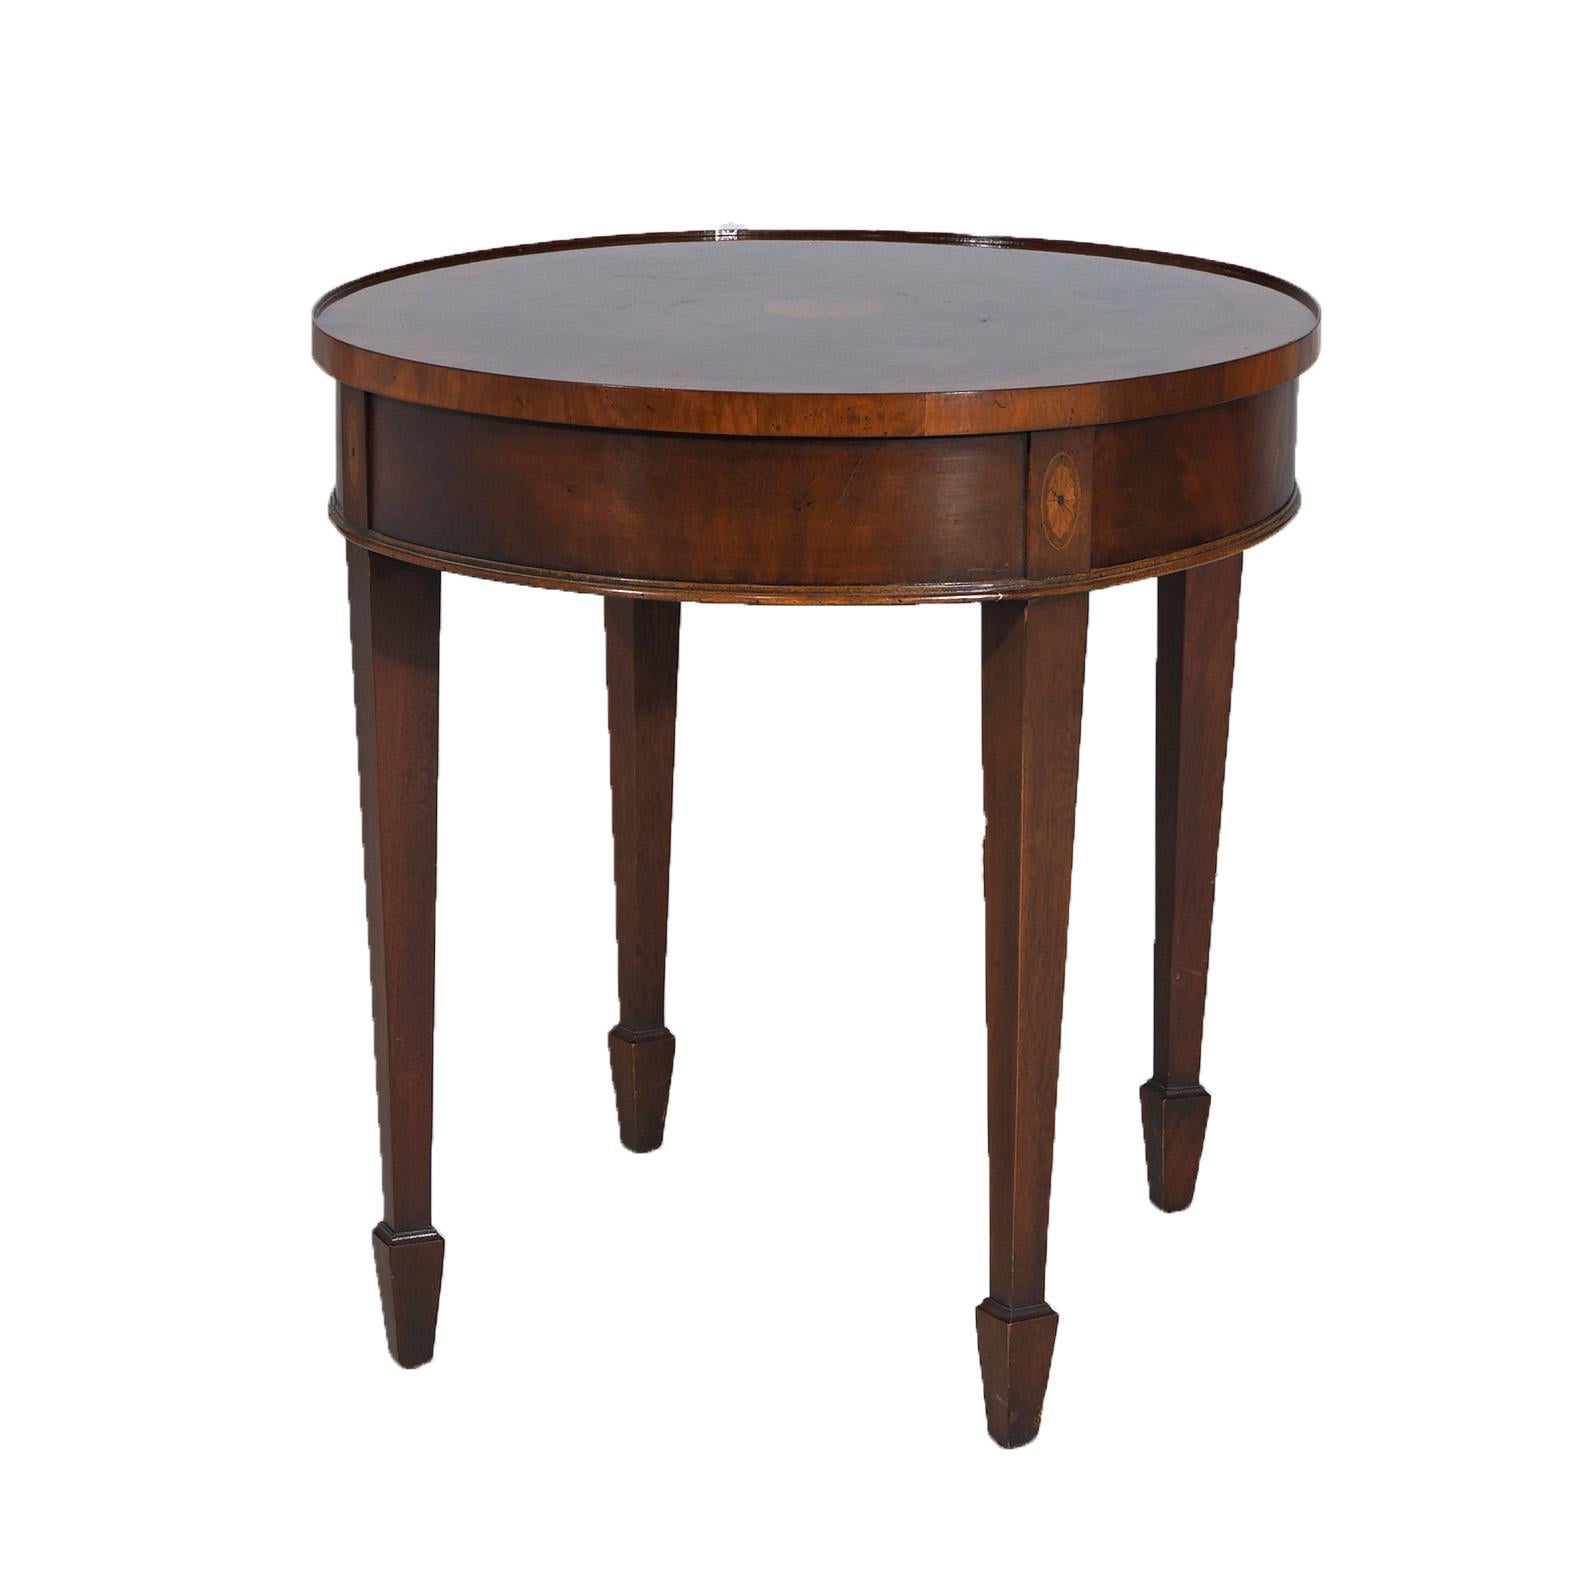 Hekman Copley Style Flame Mahogany & Satinwood Inlaid Side Table C1930 For Sale 4